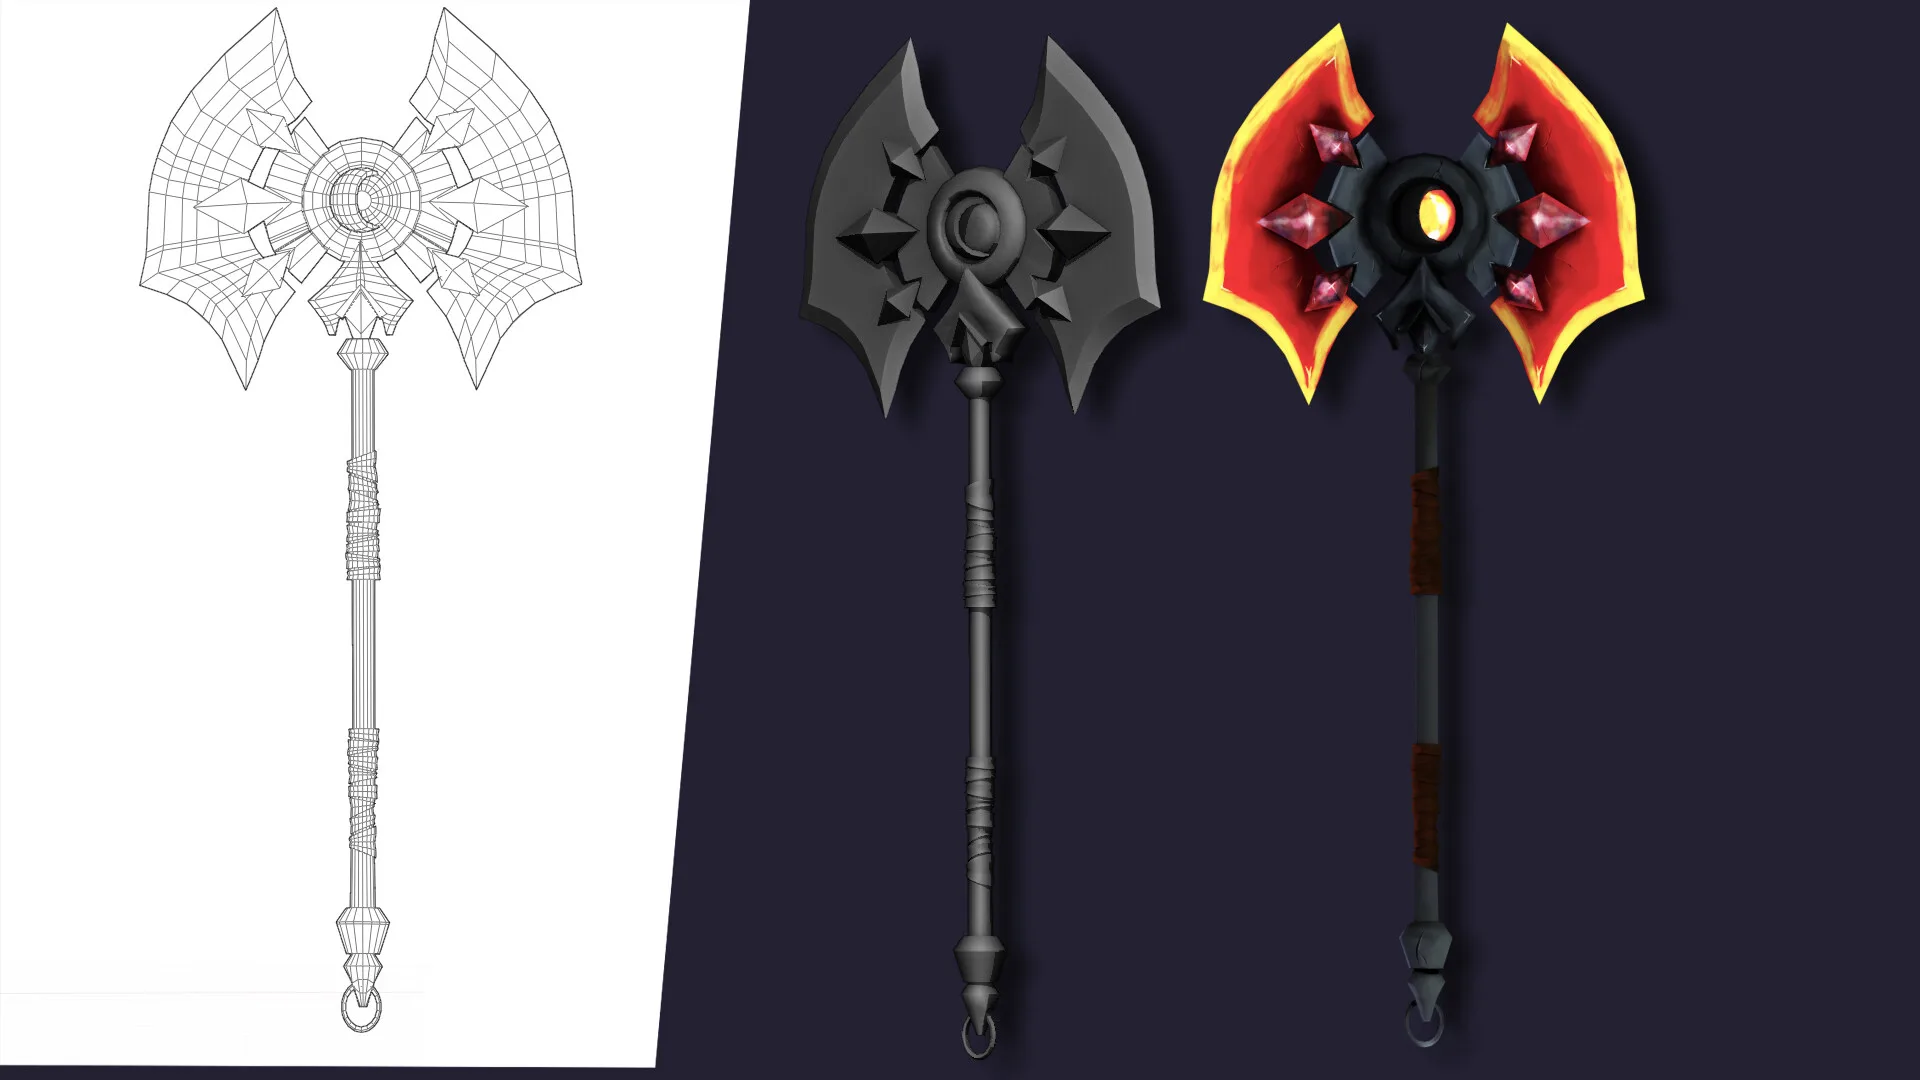 Pack of 10 Low Poly Fantasy Weapons